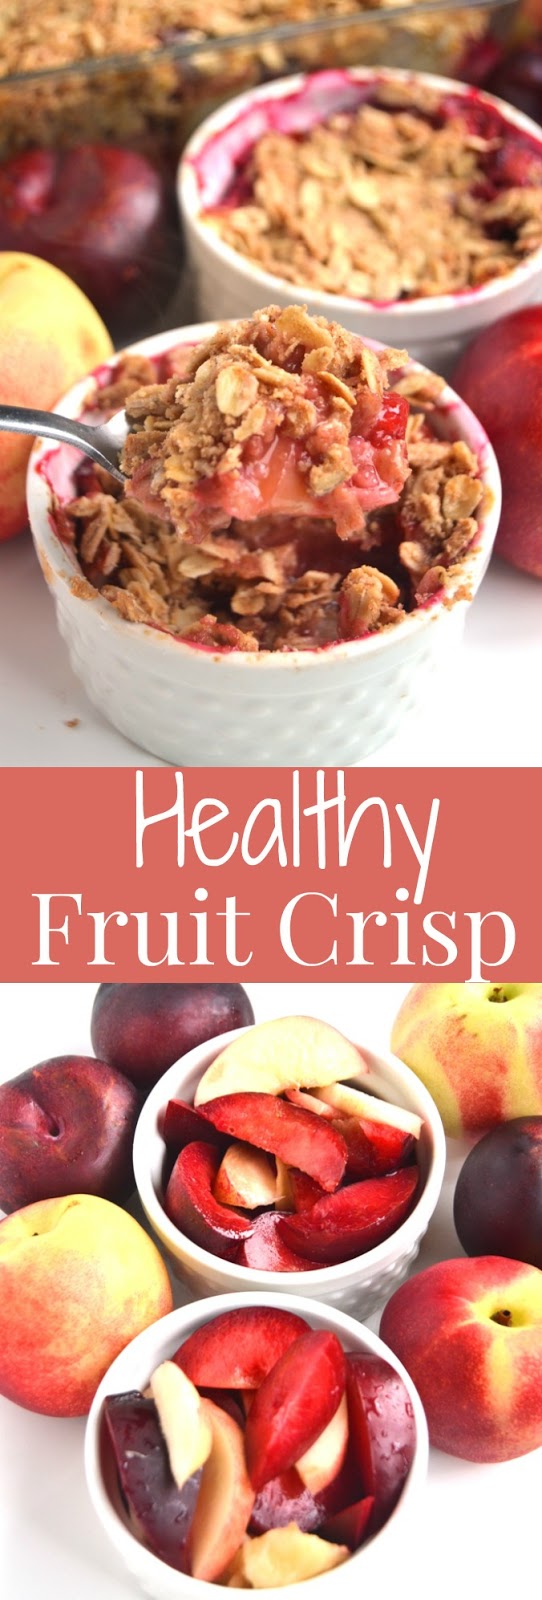 Healthy Fruit Crisp is the perfect, easy dessert with your choice of fresh fruit! Made lighter with whole-wheat flour, less sugar and coconut oil. www.nutritionistreviews.com